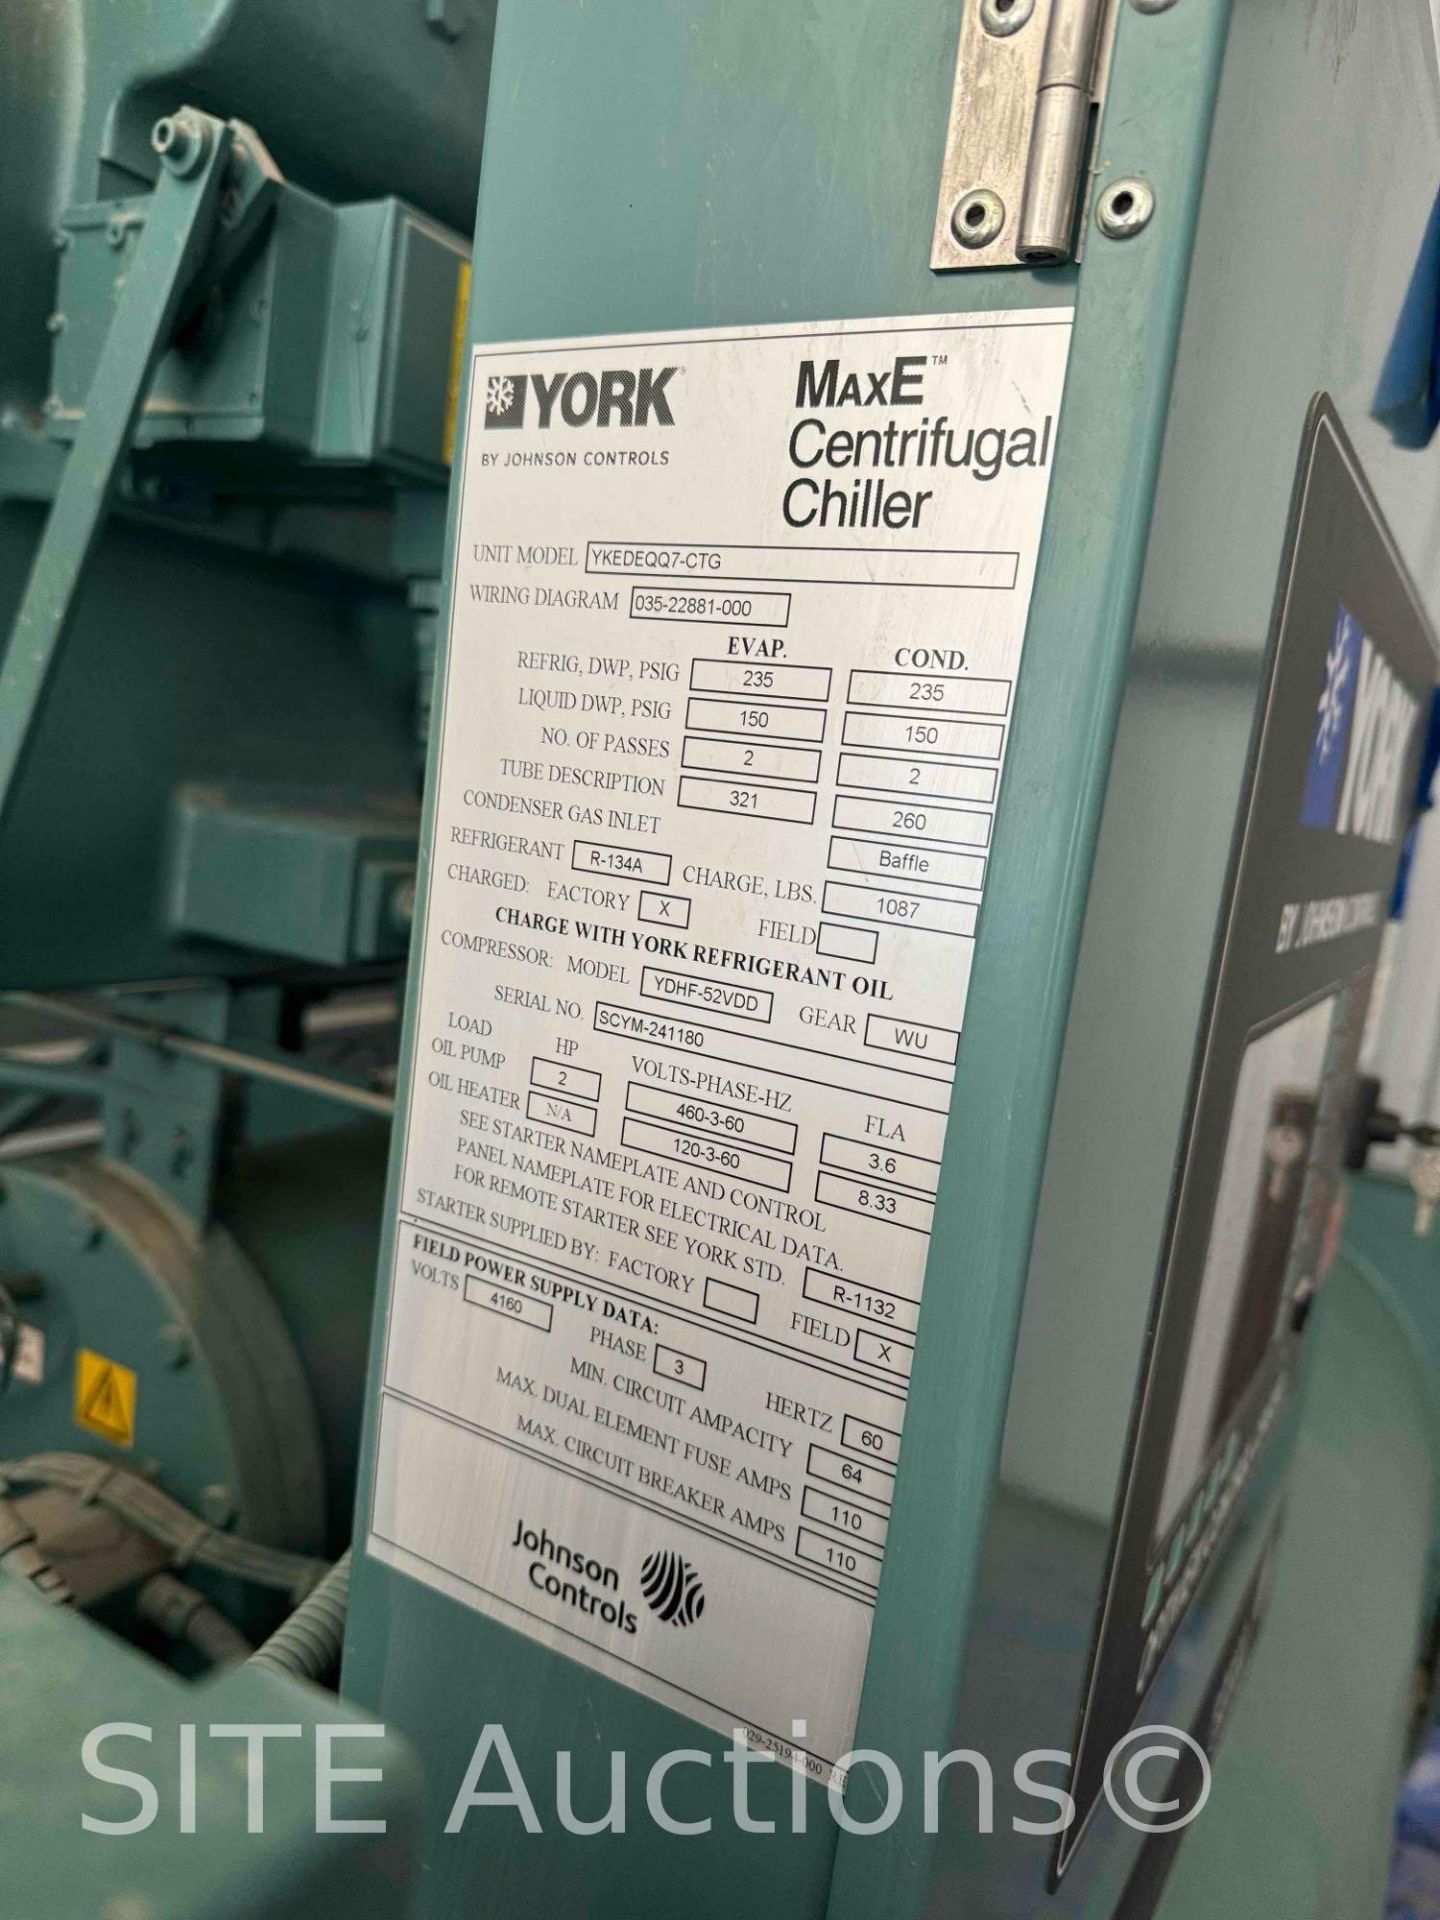 UNUSED 2012 York by Johnson Controls MaxE Centrifugal Chiller - Image 13 of 21